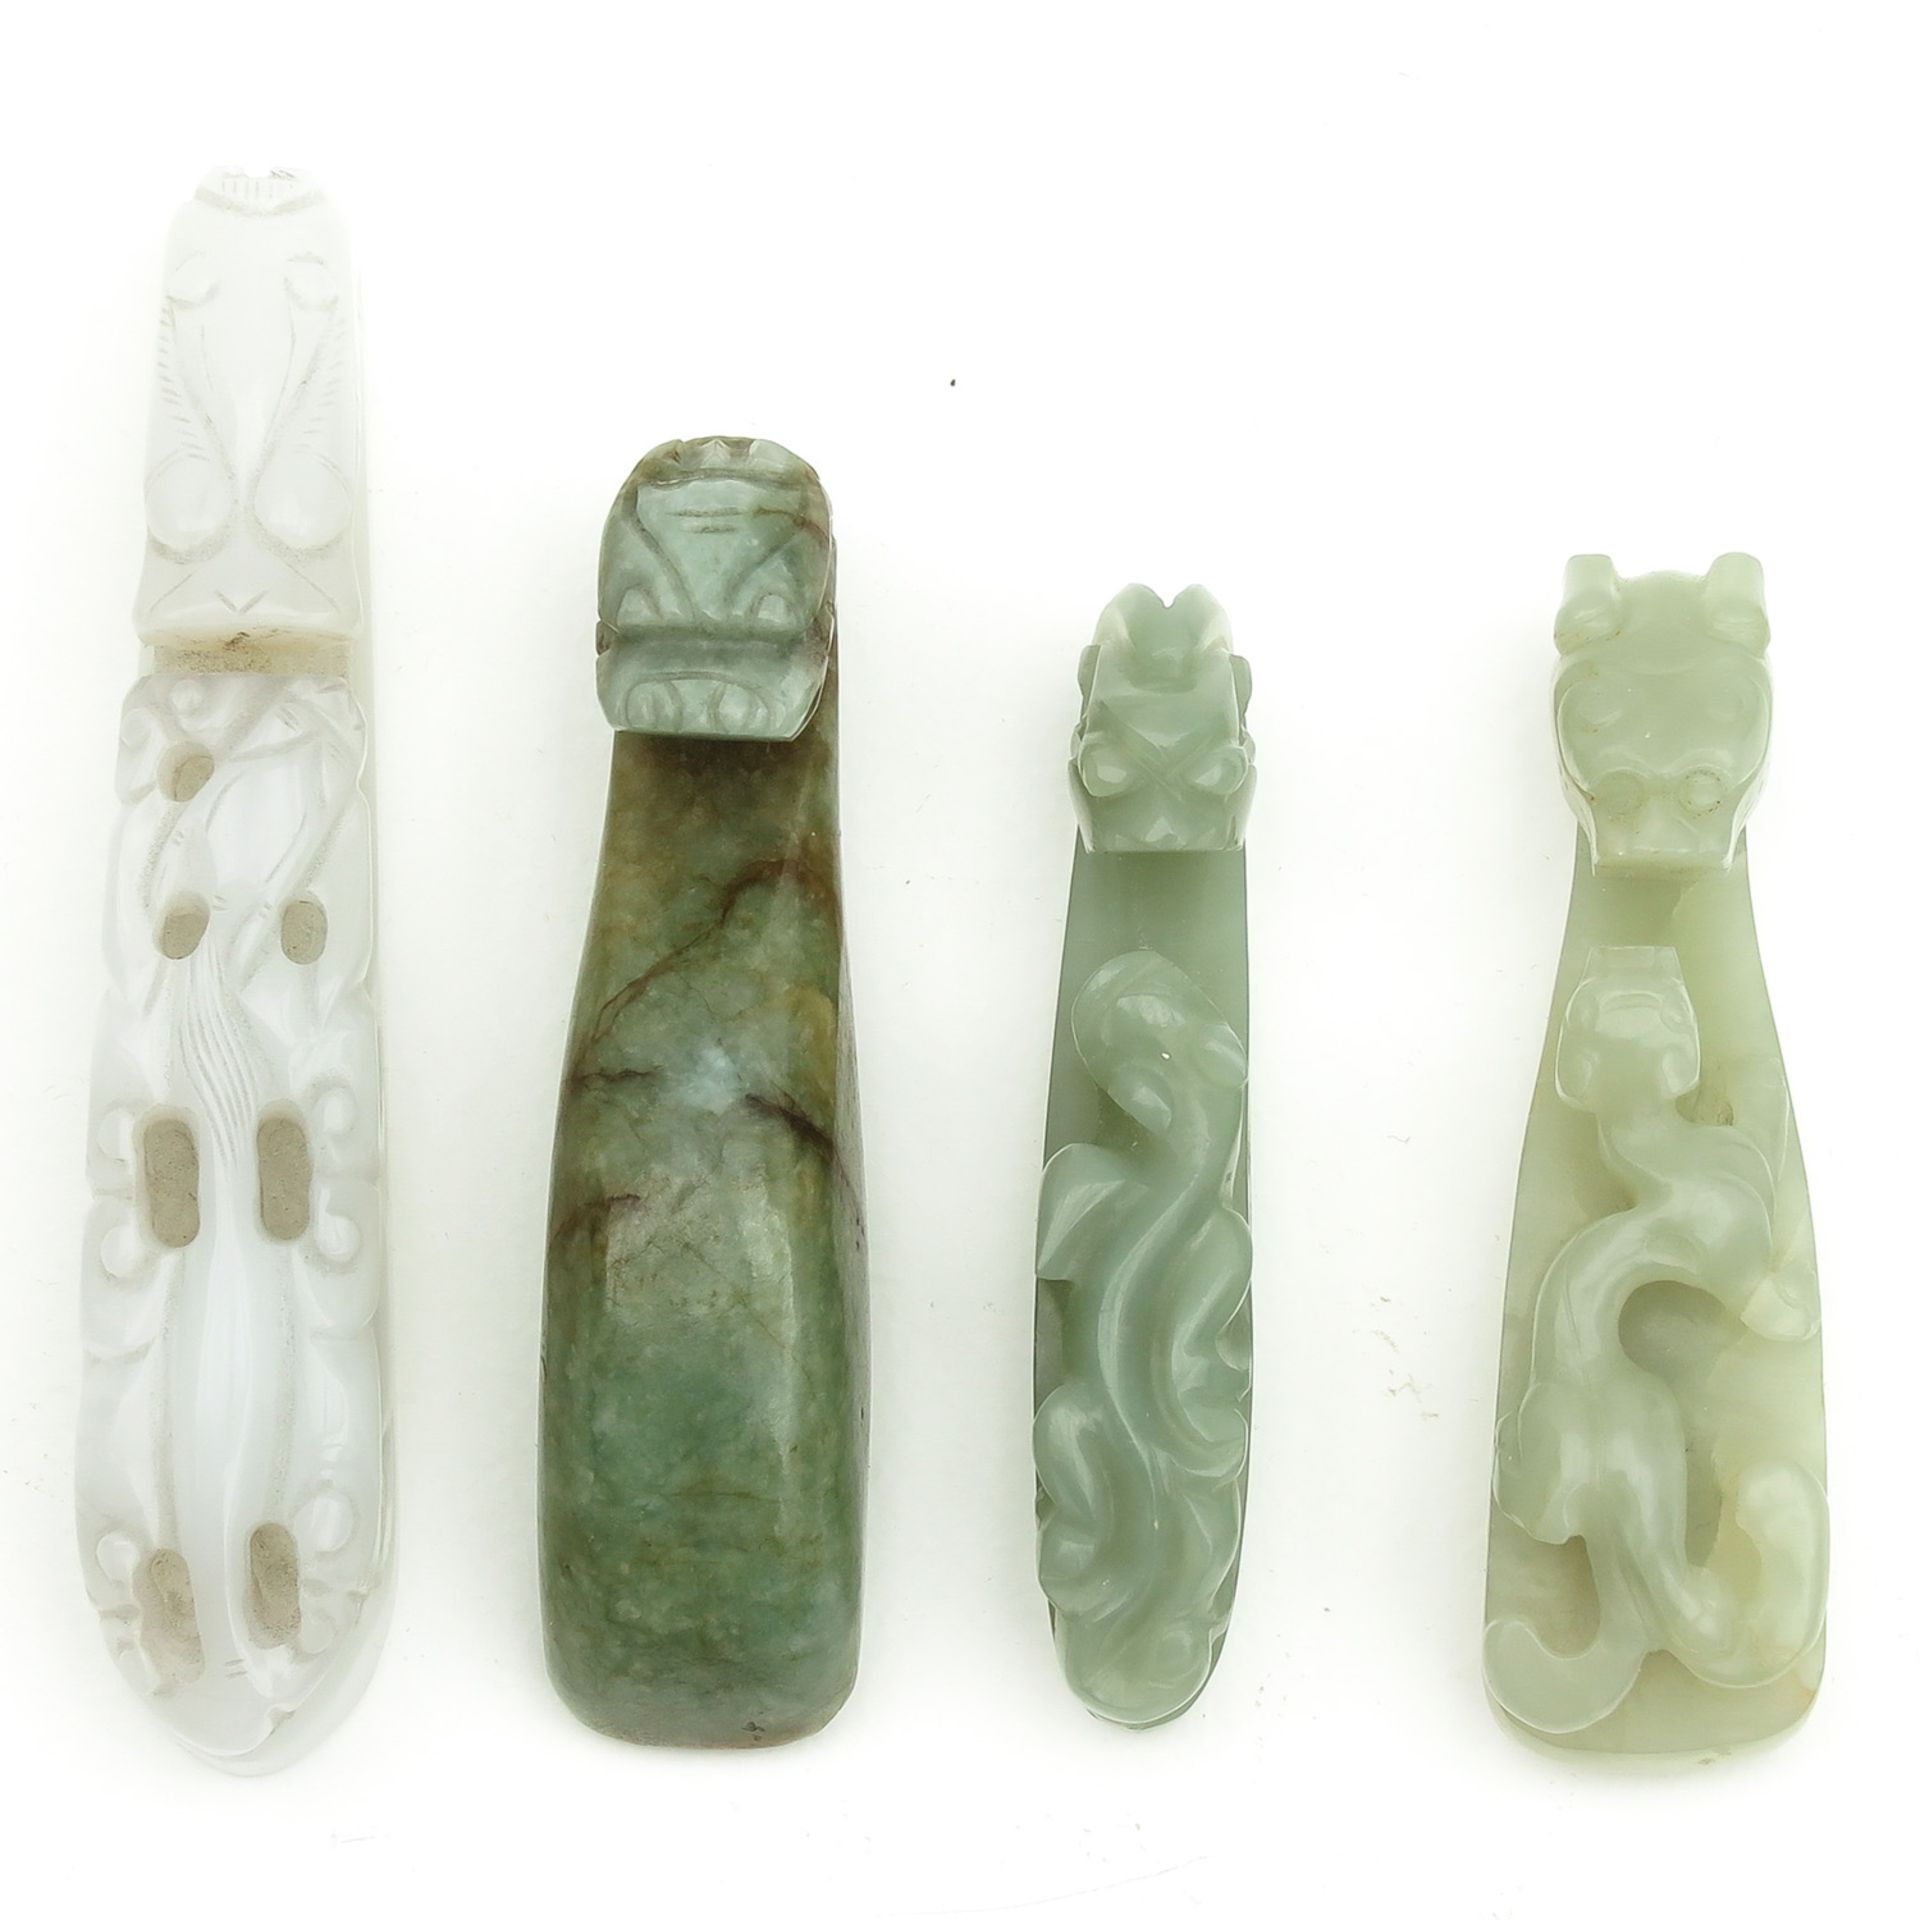 A Collection of 4 Jade Belt Hooks - Image 5 of 9